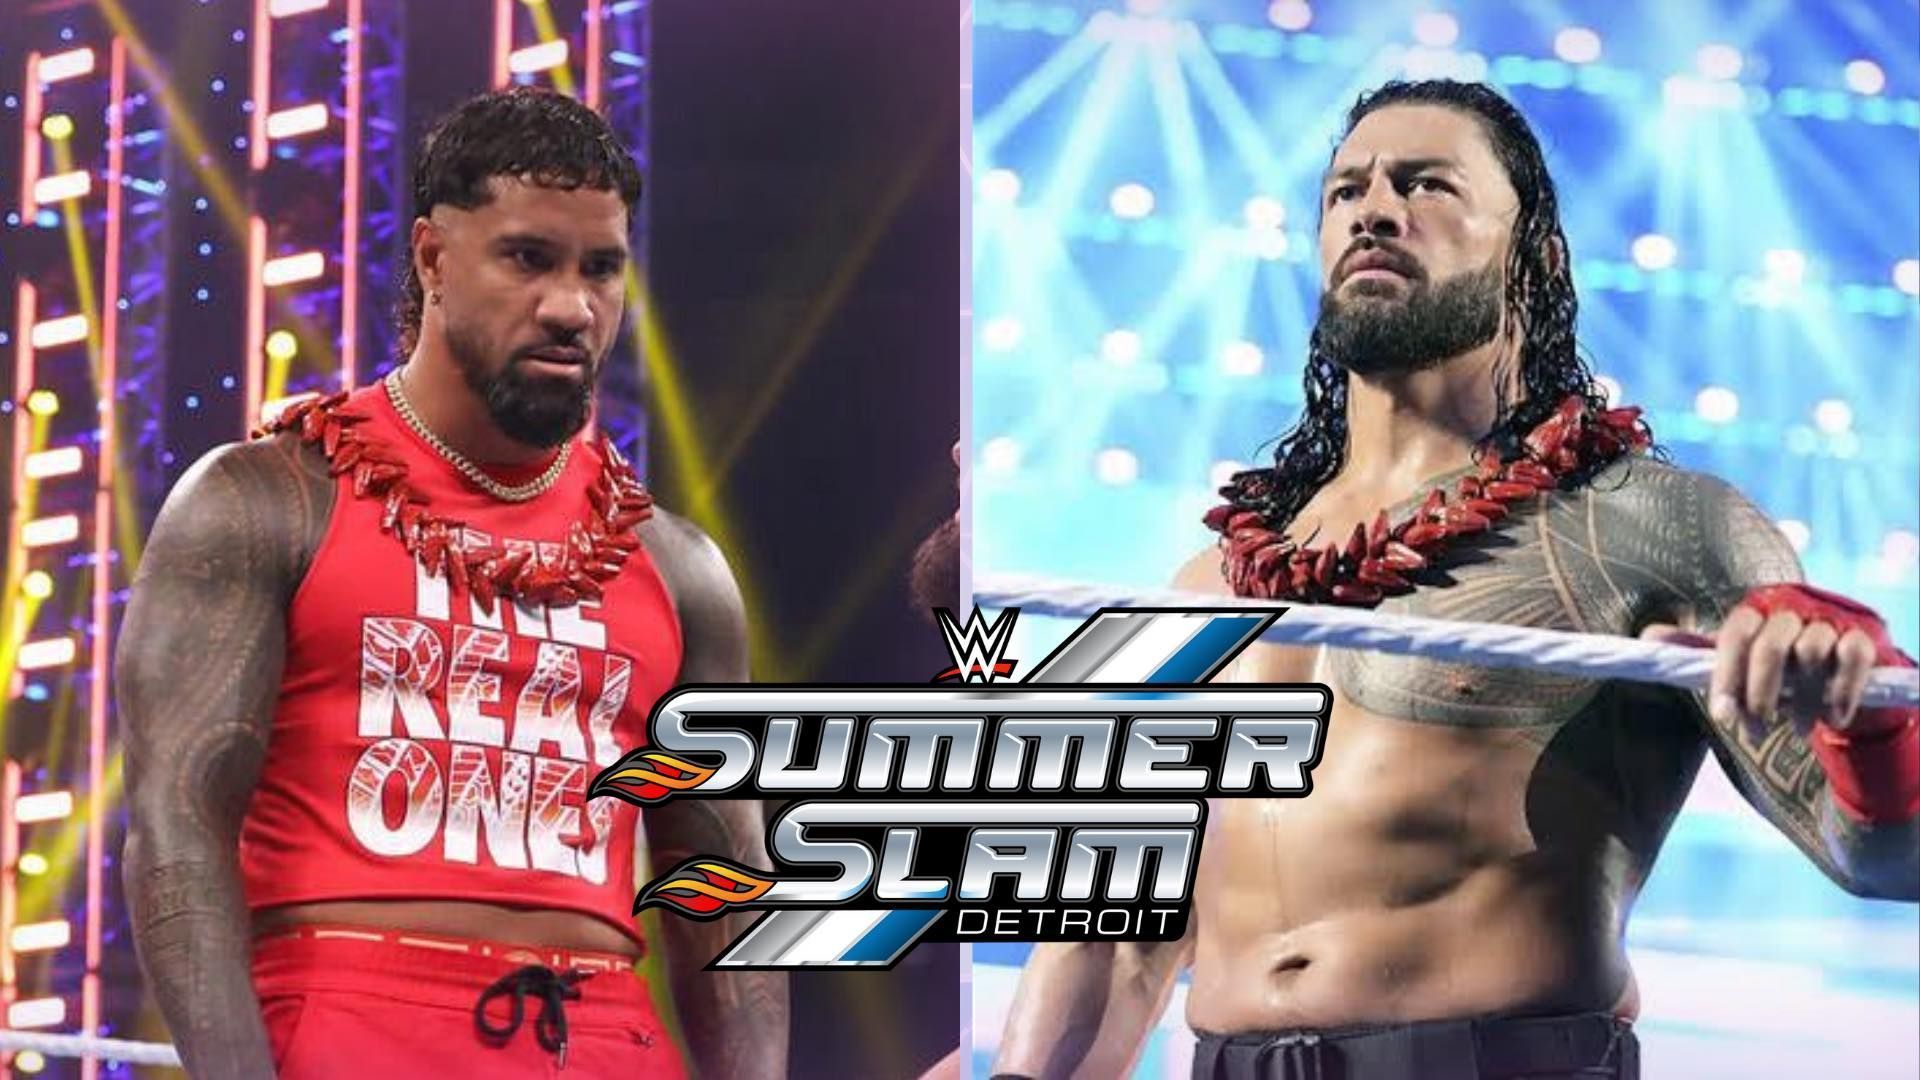 Jey Uso and Roman Reigns are supposed to fight at WWE SummerSlam